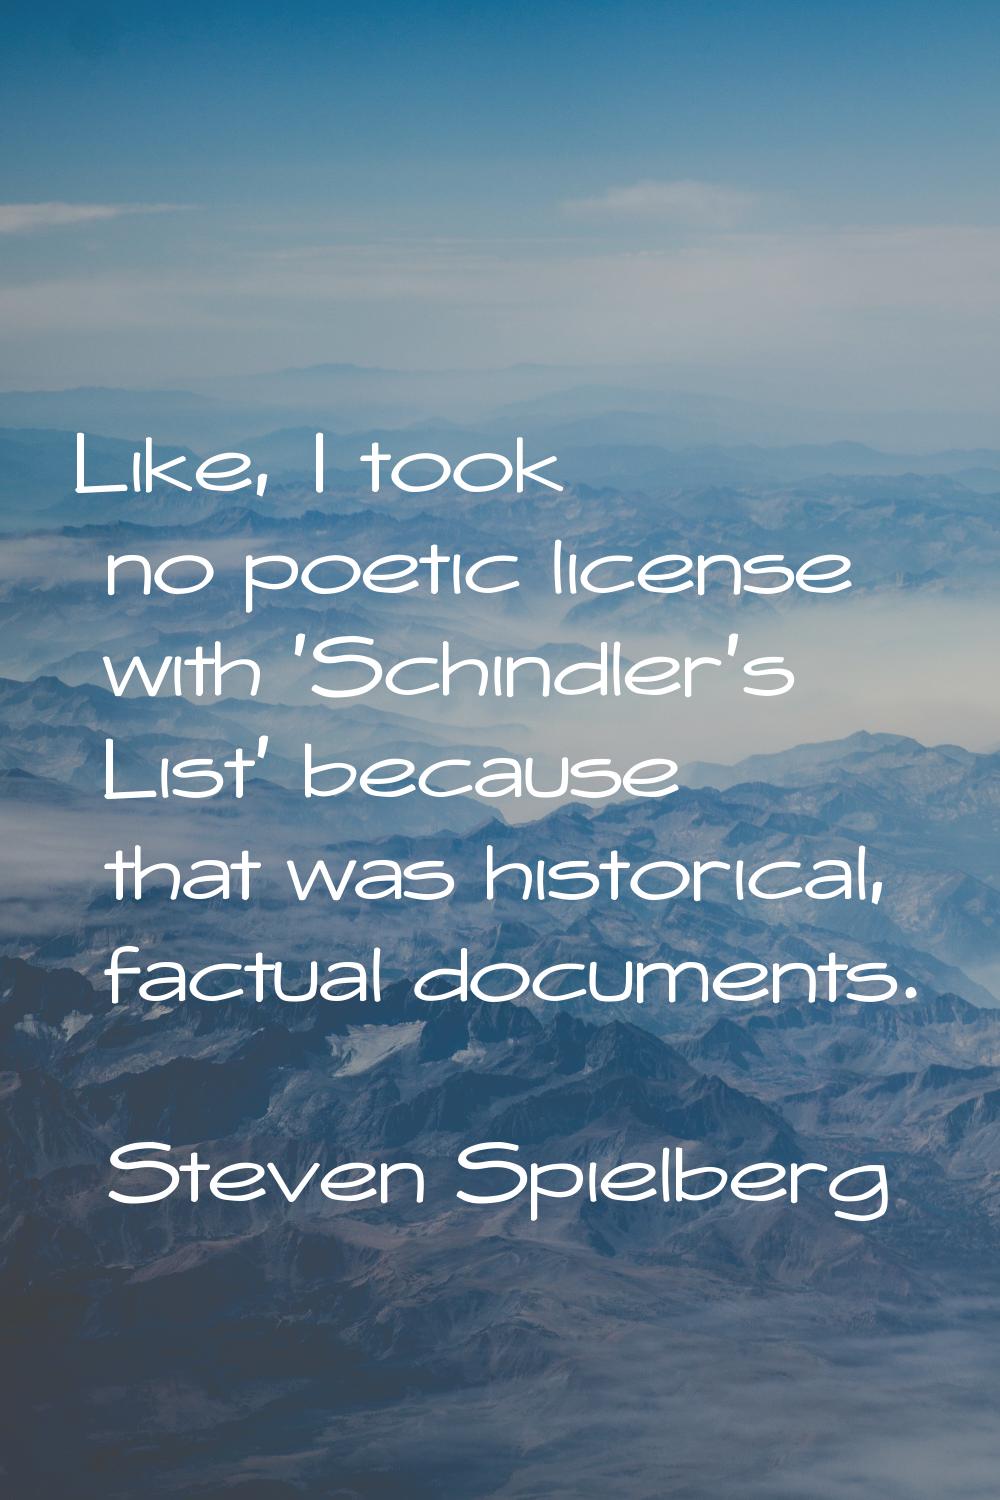 Like, I took no poetic license with 'Schindler's List' because that was historical, factual documen